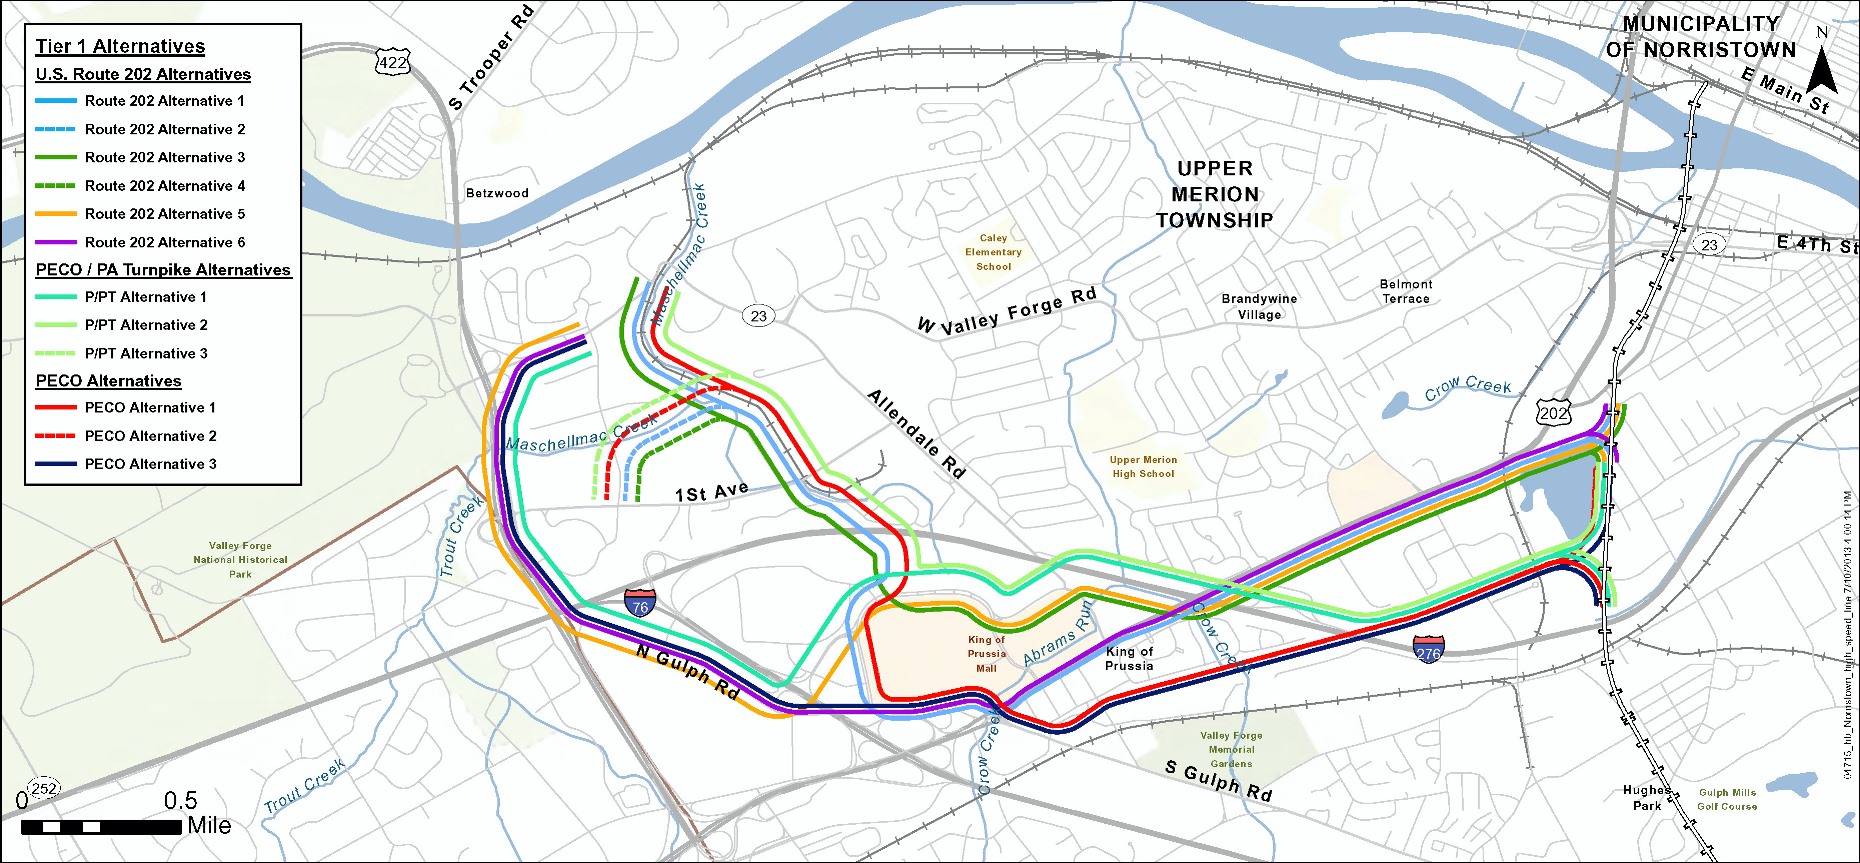 In July, SEPTA identified 12 route alternatives for the proposed King of Prussia Rail Line, Photo courtesy of SEPTA